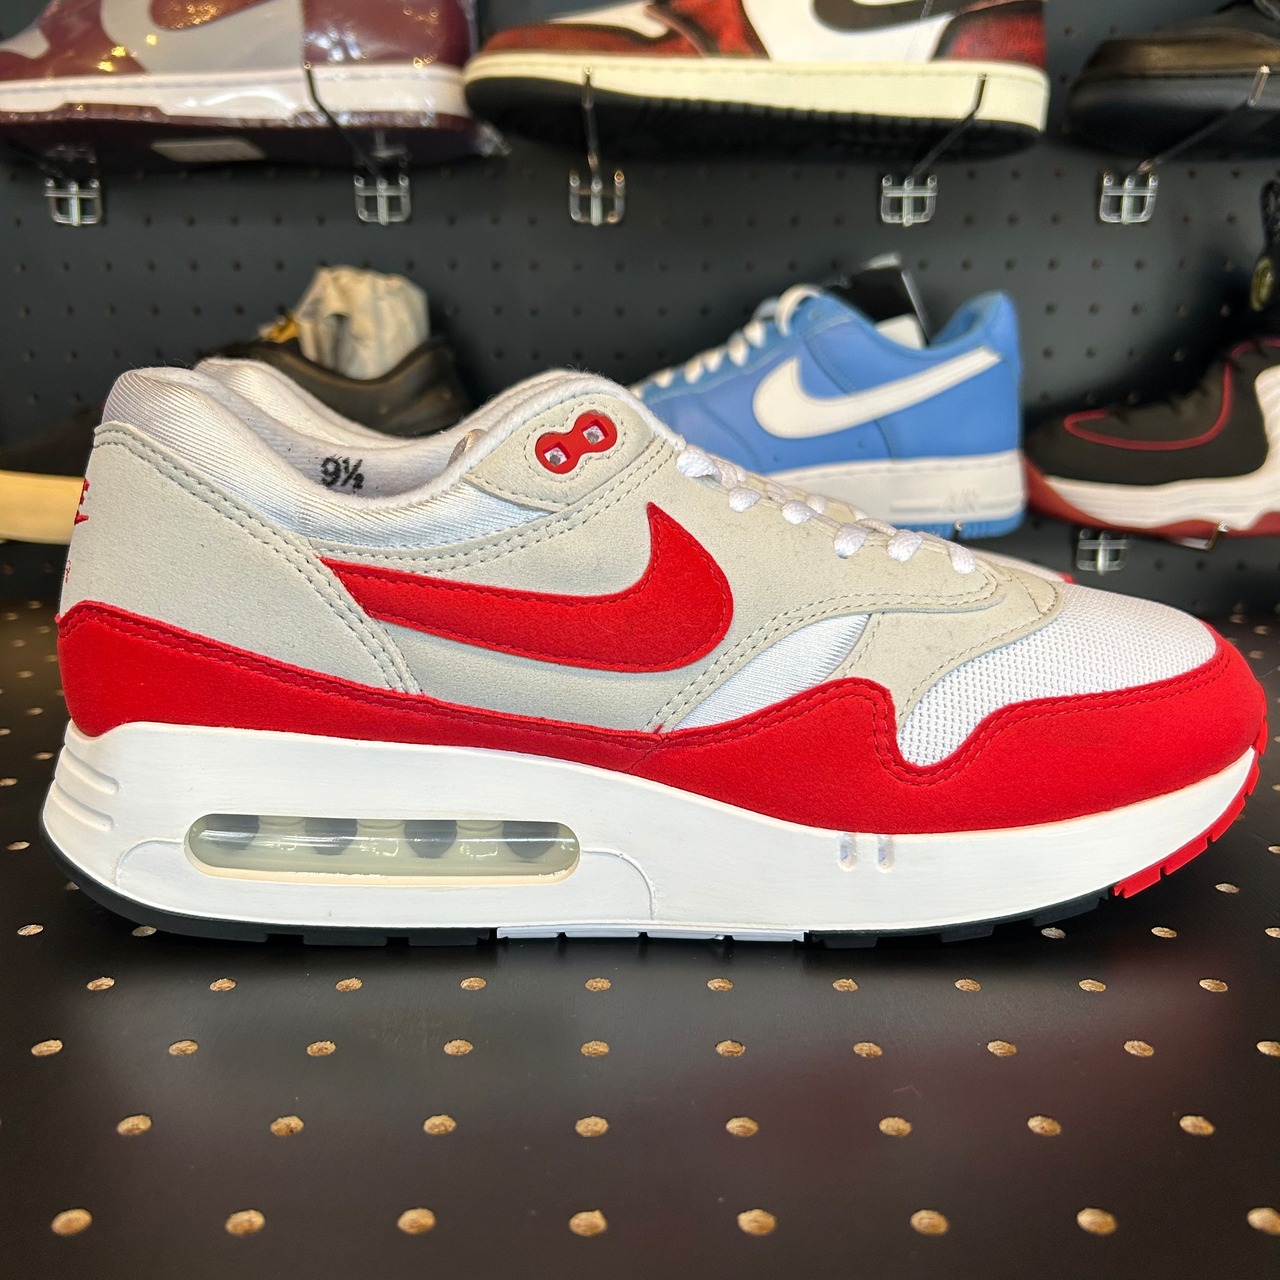 Nike Air Max 1 '86 OG "Big Bubble Red" US9.5/27.5cm | RECEPTION SNEAKER